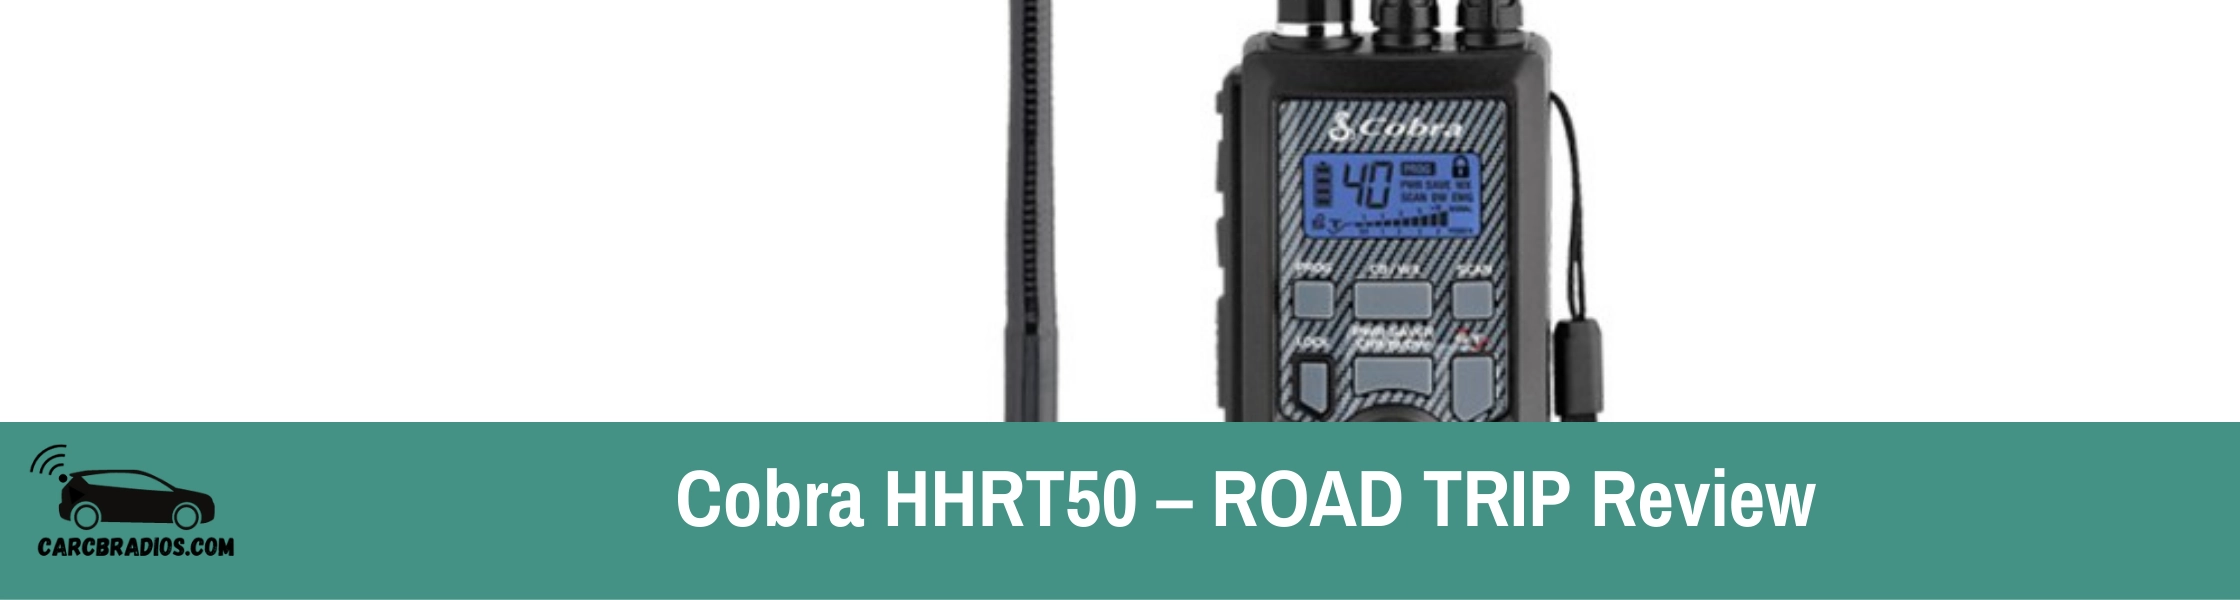 Cobra HHRT50 - ROAD TRIP Review: I recently picked up the Cobra HHRT 50-Roadtrip handheld CB radio for a fun boys' weekend trip. Here is my review: